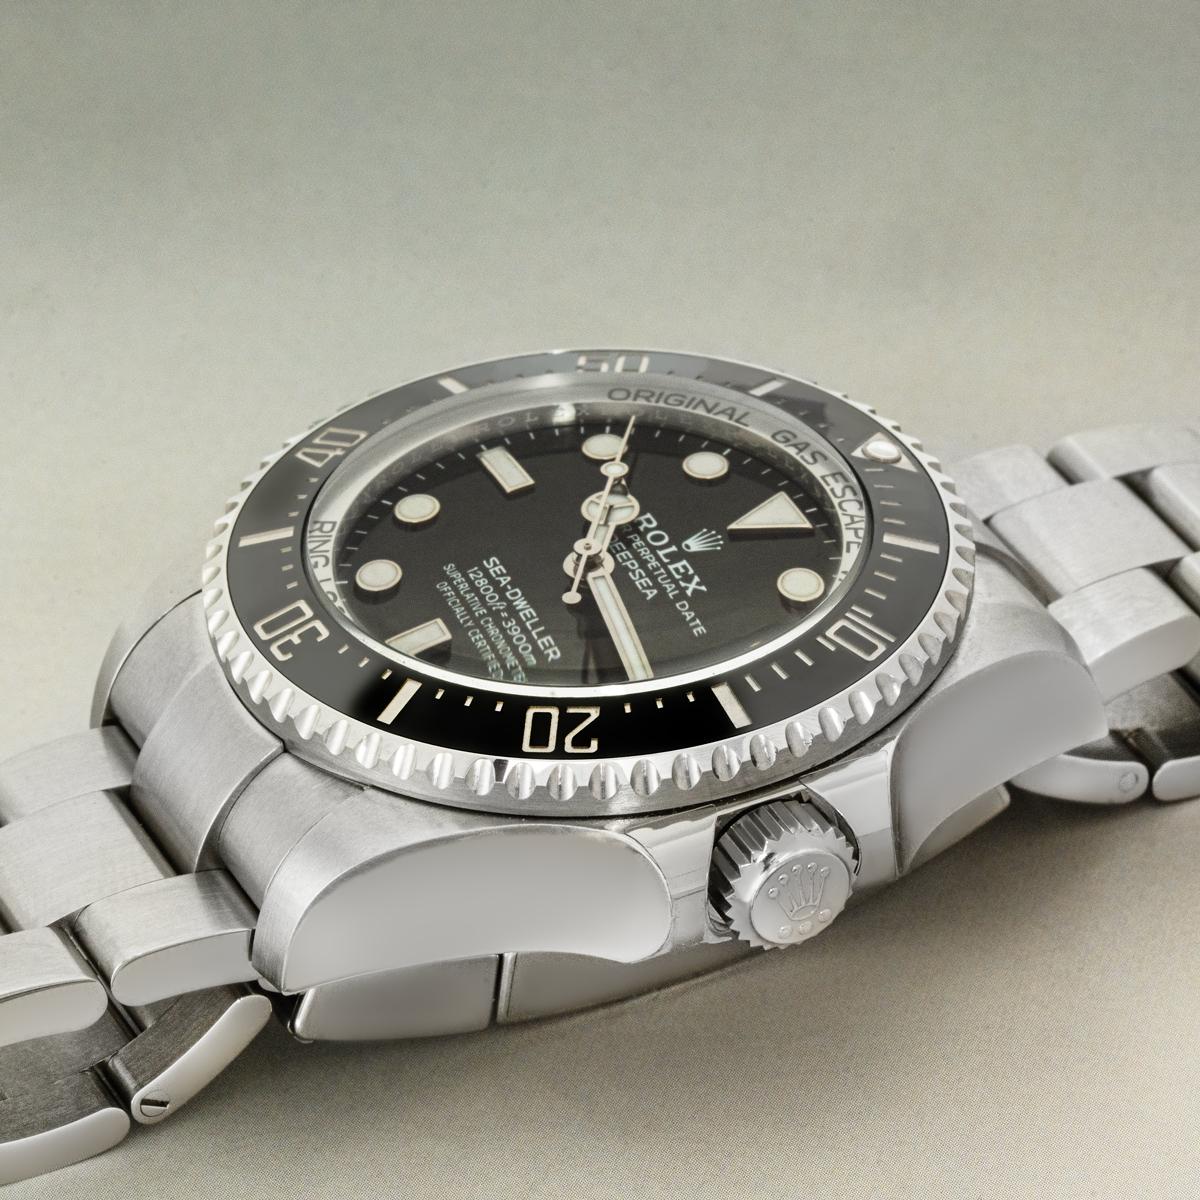 The 136660 Deepsea Sea-Dweller in Oystersteel by Rolex. Featuring an intense black dial under a domed scratch-resistant sapphire crystal. The stainless steel uni-directional rotatable bezel features a black ceramic insert with platinum coated